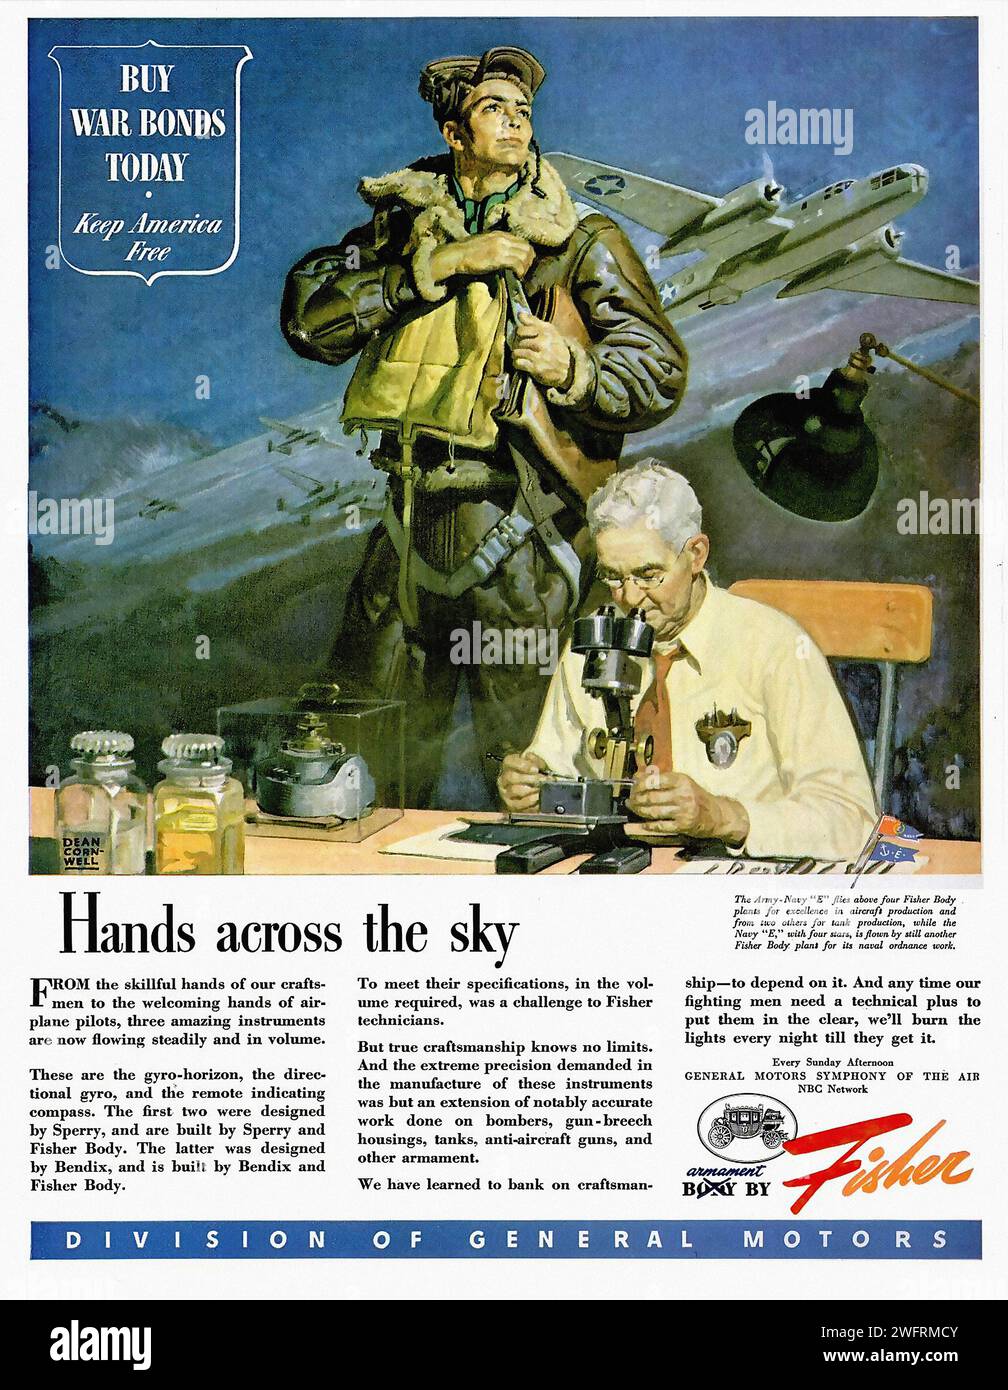 “BUY WAR BONDS TODAY. KEEP AMERICA FREE. HANDS ACROSS THE SKY.”  This is a vintage advertisement poster for General Motors, originating from the United States during the World War II era. The poster features a blue sky with clouds as the background, and the main subject is a soldier in a green uniform with a yellow backpack and a rifle. The text on the poster promotes the purchase of war bonds and emphasizes the importance of working together in the war effort. It also highlights that thousands of war planes are being built every day by the skilled hands of General Motors’ employees. The Gener Stock Photo